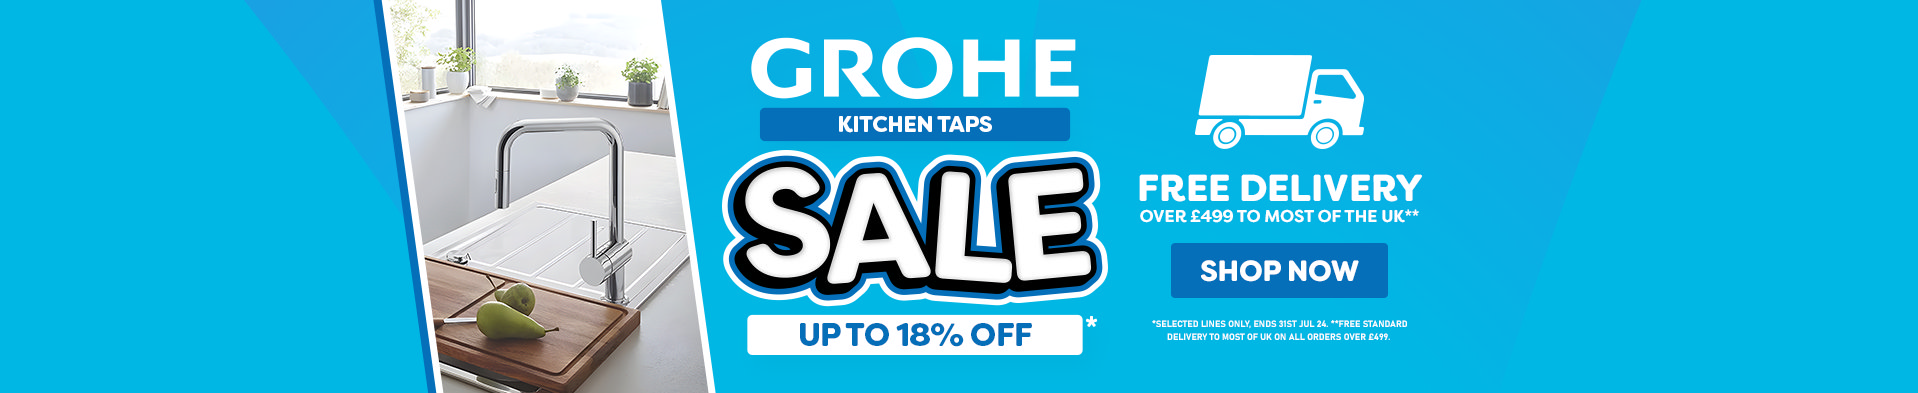 Grohe Tap Sale - Free Delivery